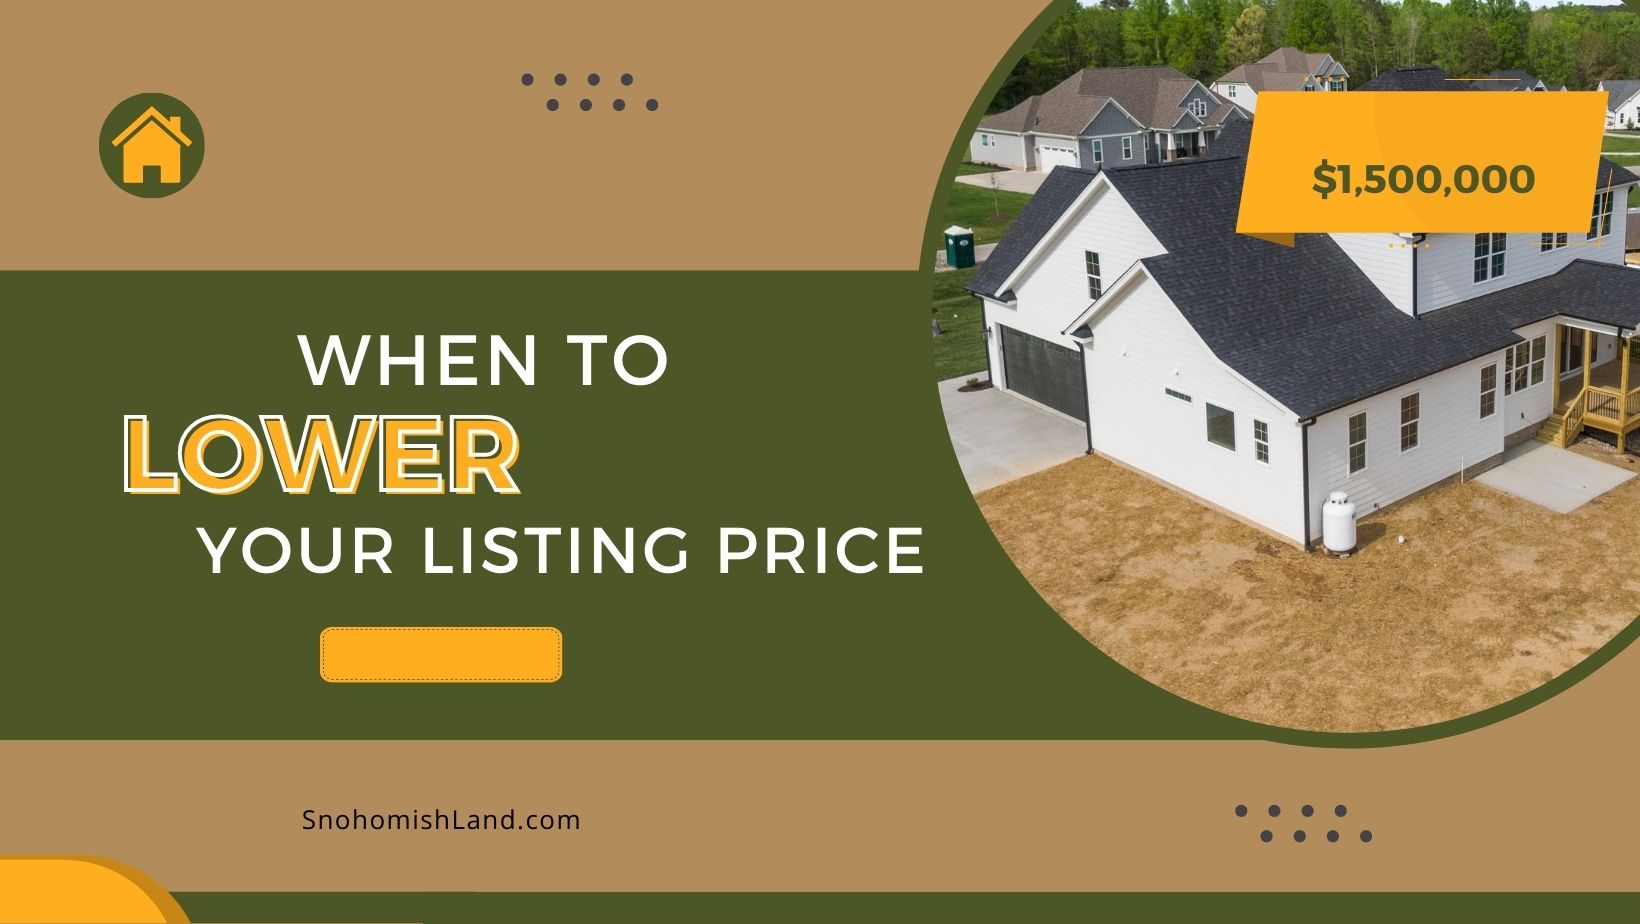 When Should You Lower Your Listing Price?